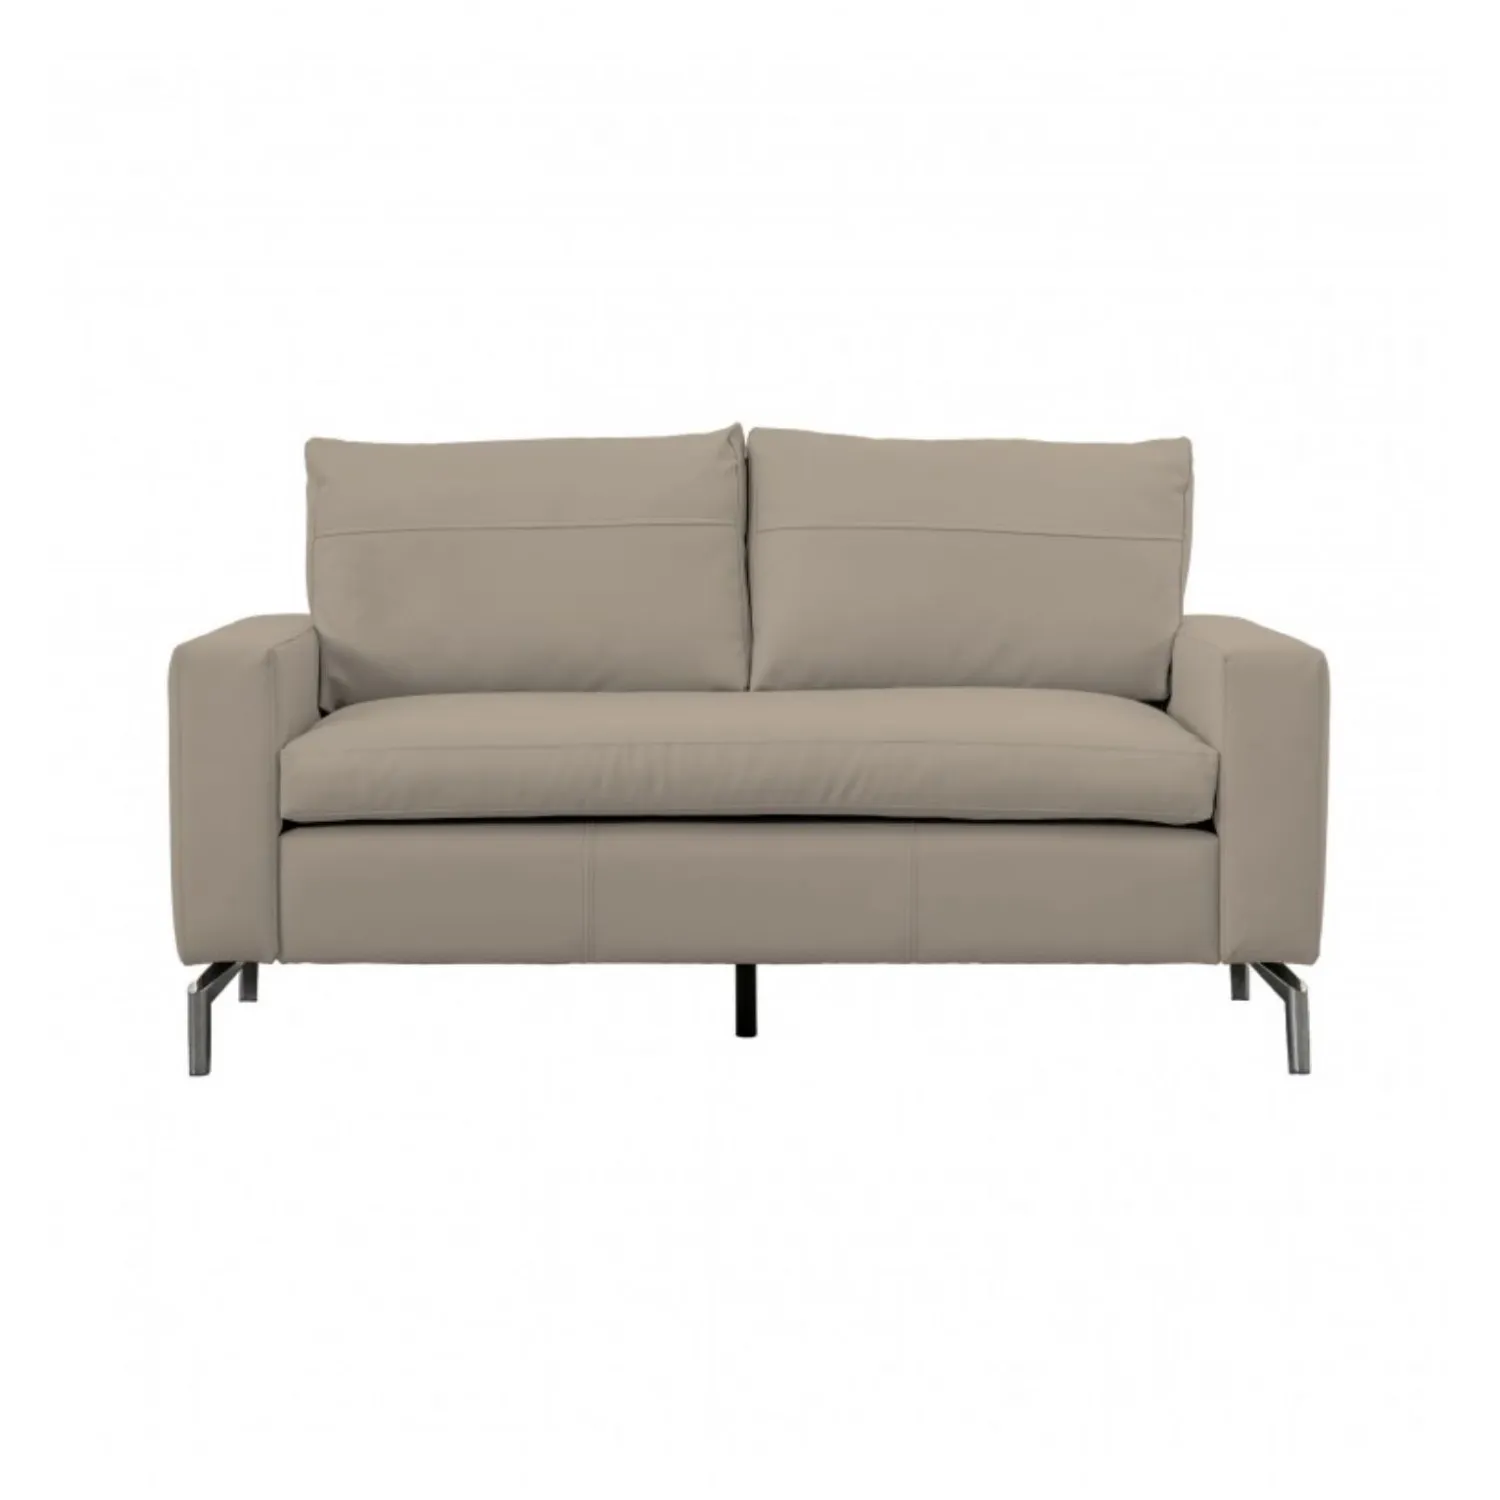 Modern Style Sabino Pebble Faux Leather Upholstered 2 Seater Sofa 86x155cm